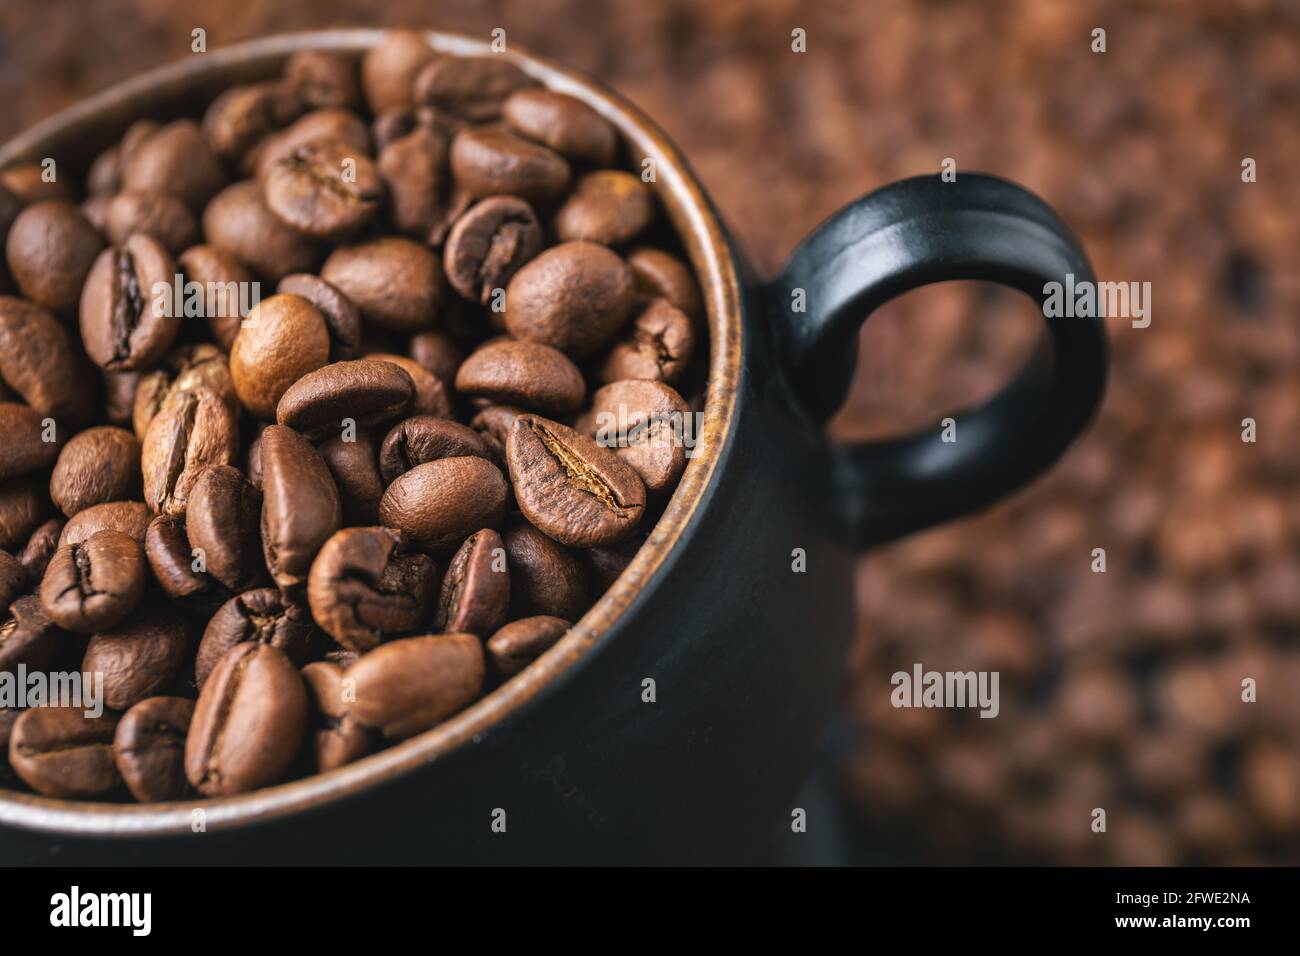 Coffee cup full with coffee beans, close up shoot. Coffee background concept. Stock Photo